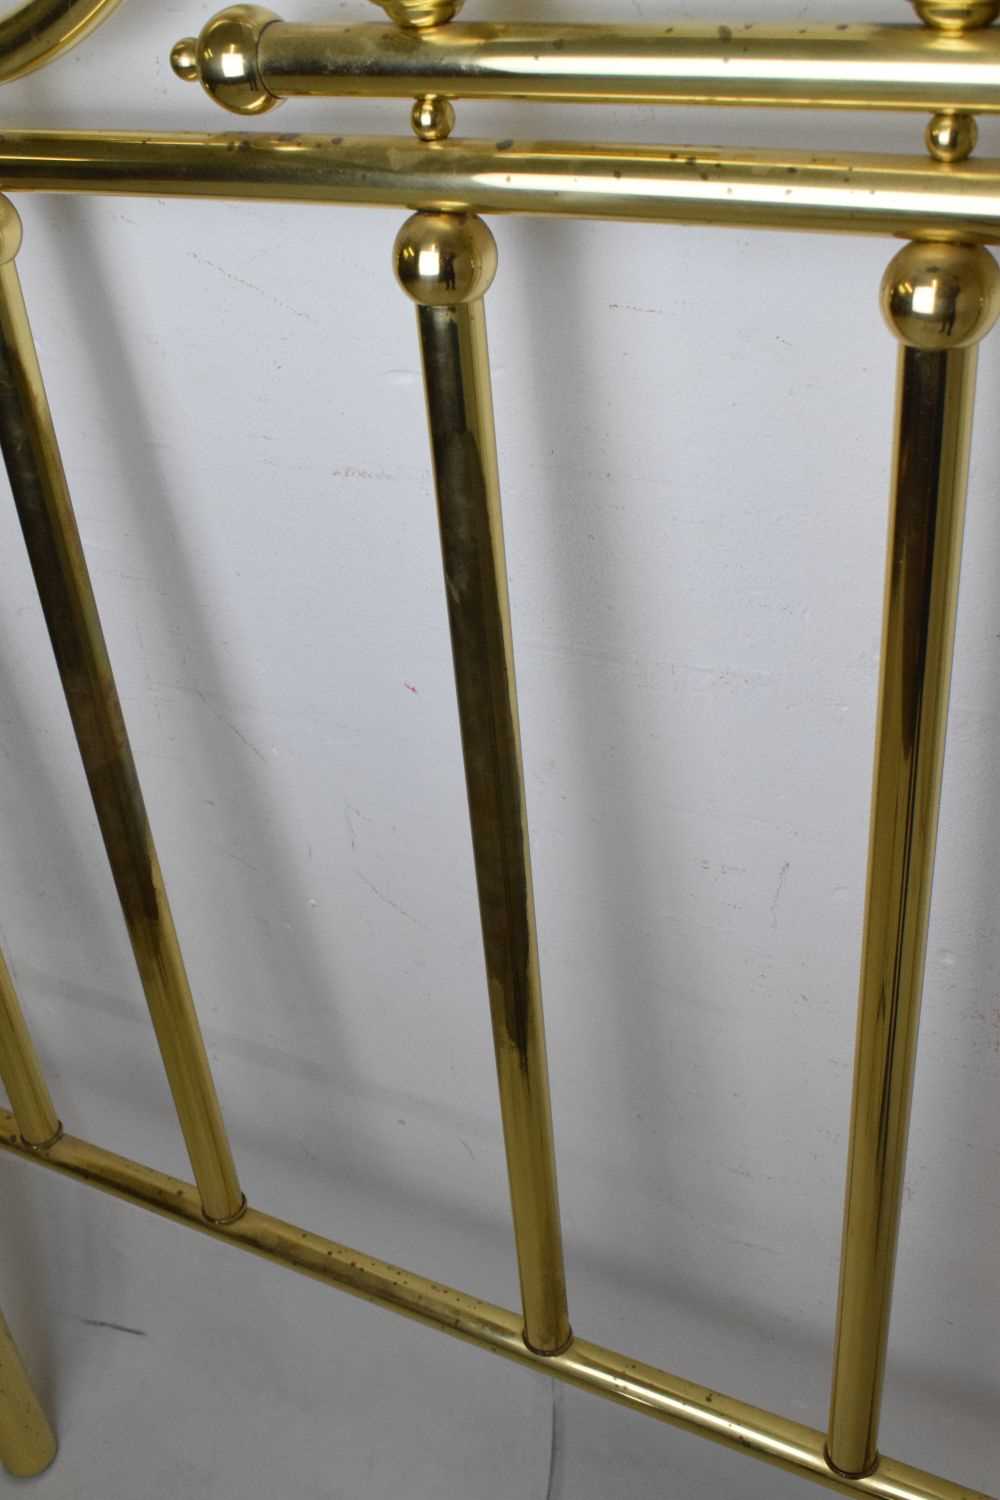 Modern brass bed end and fender - Image 8 of 15